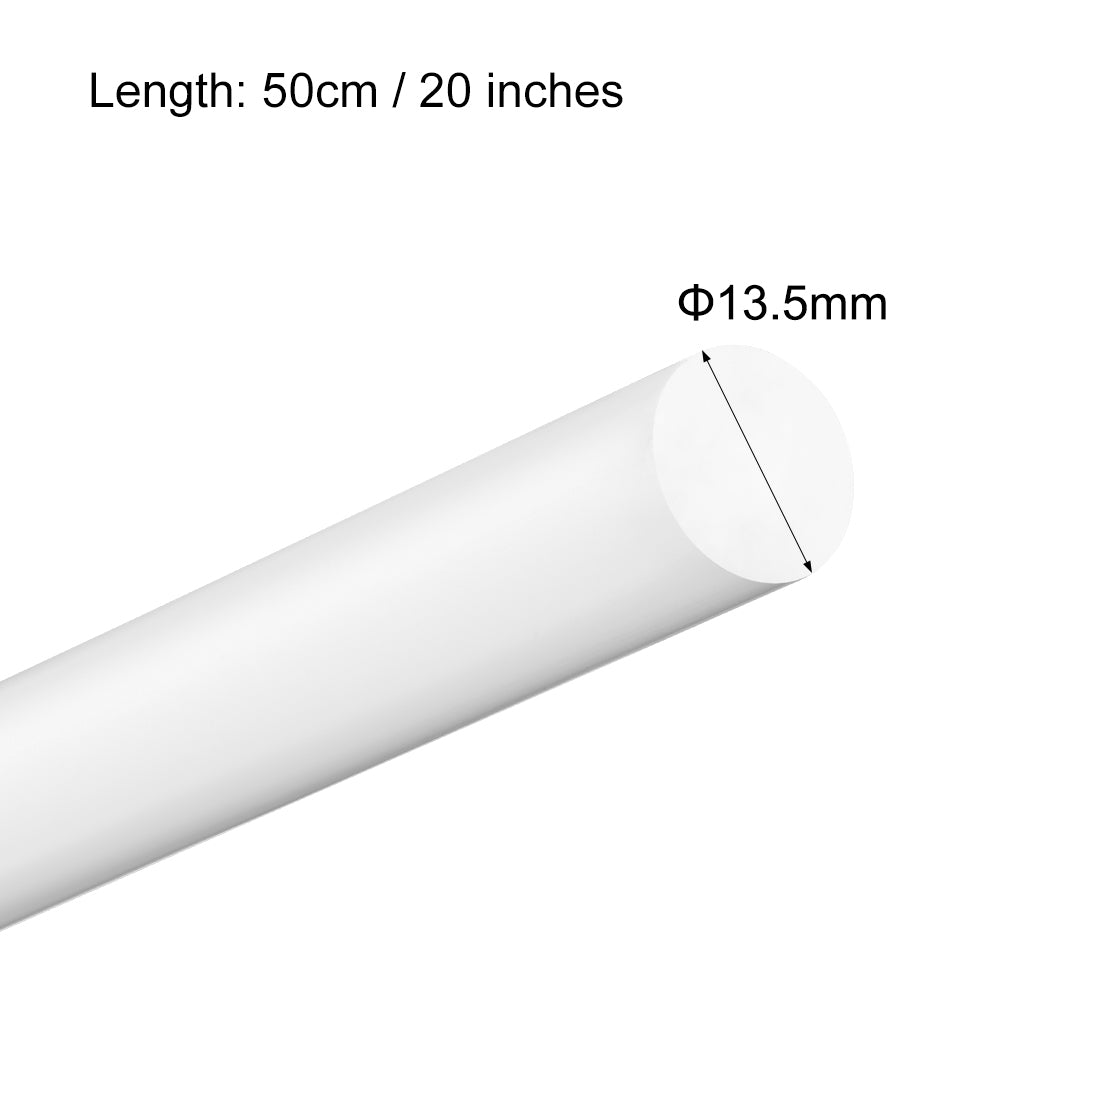 uxcell Uxcell Plastic Round Rod,12.5mm Dia 50cm White Engineering Plastic Round Bar 2pcs